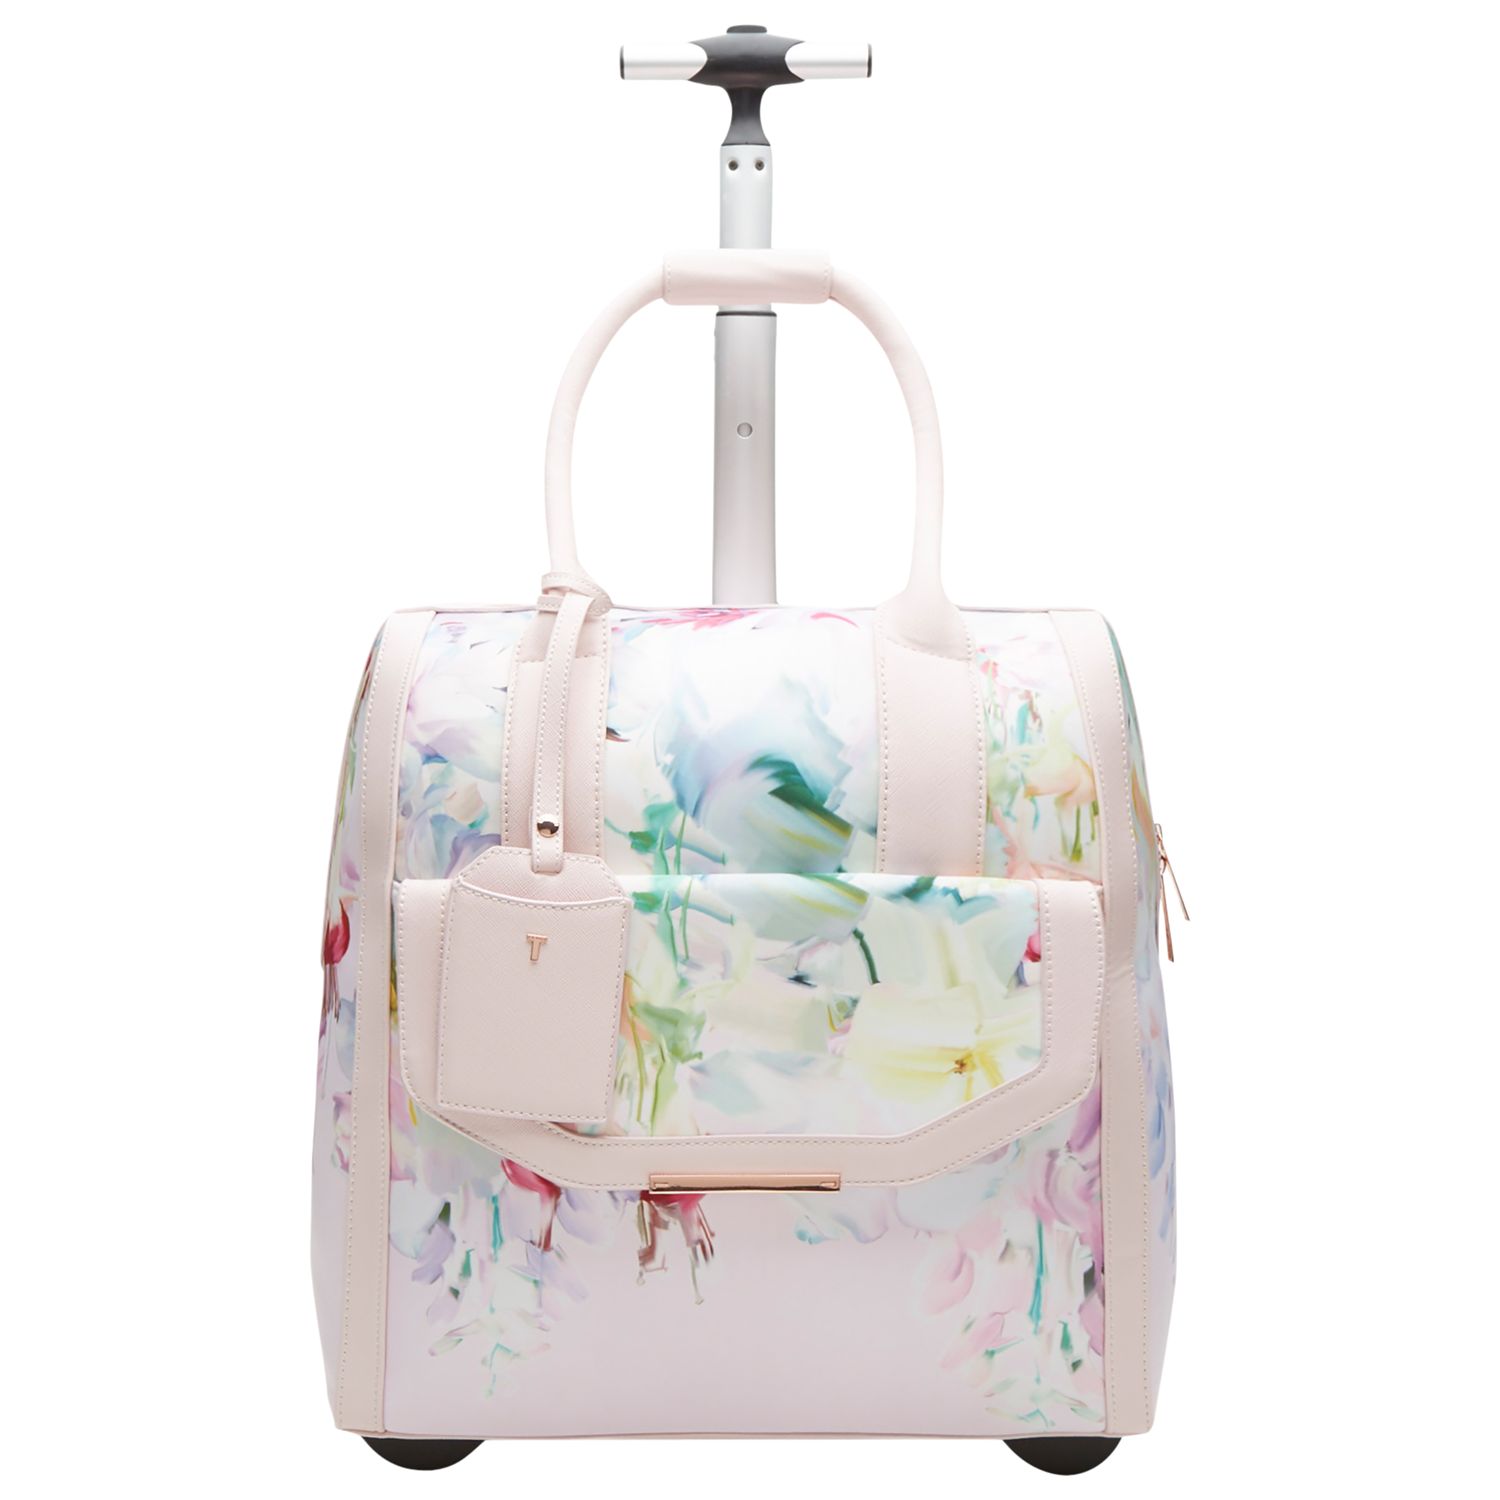 Ted Baker London Luggage & Travel Bags